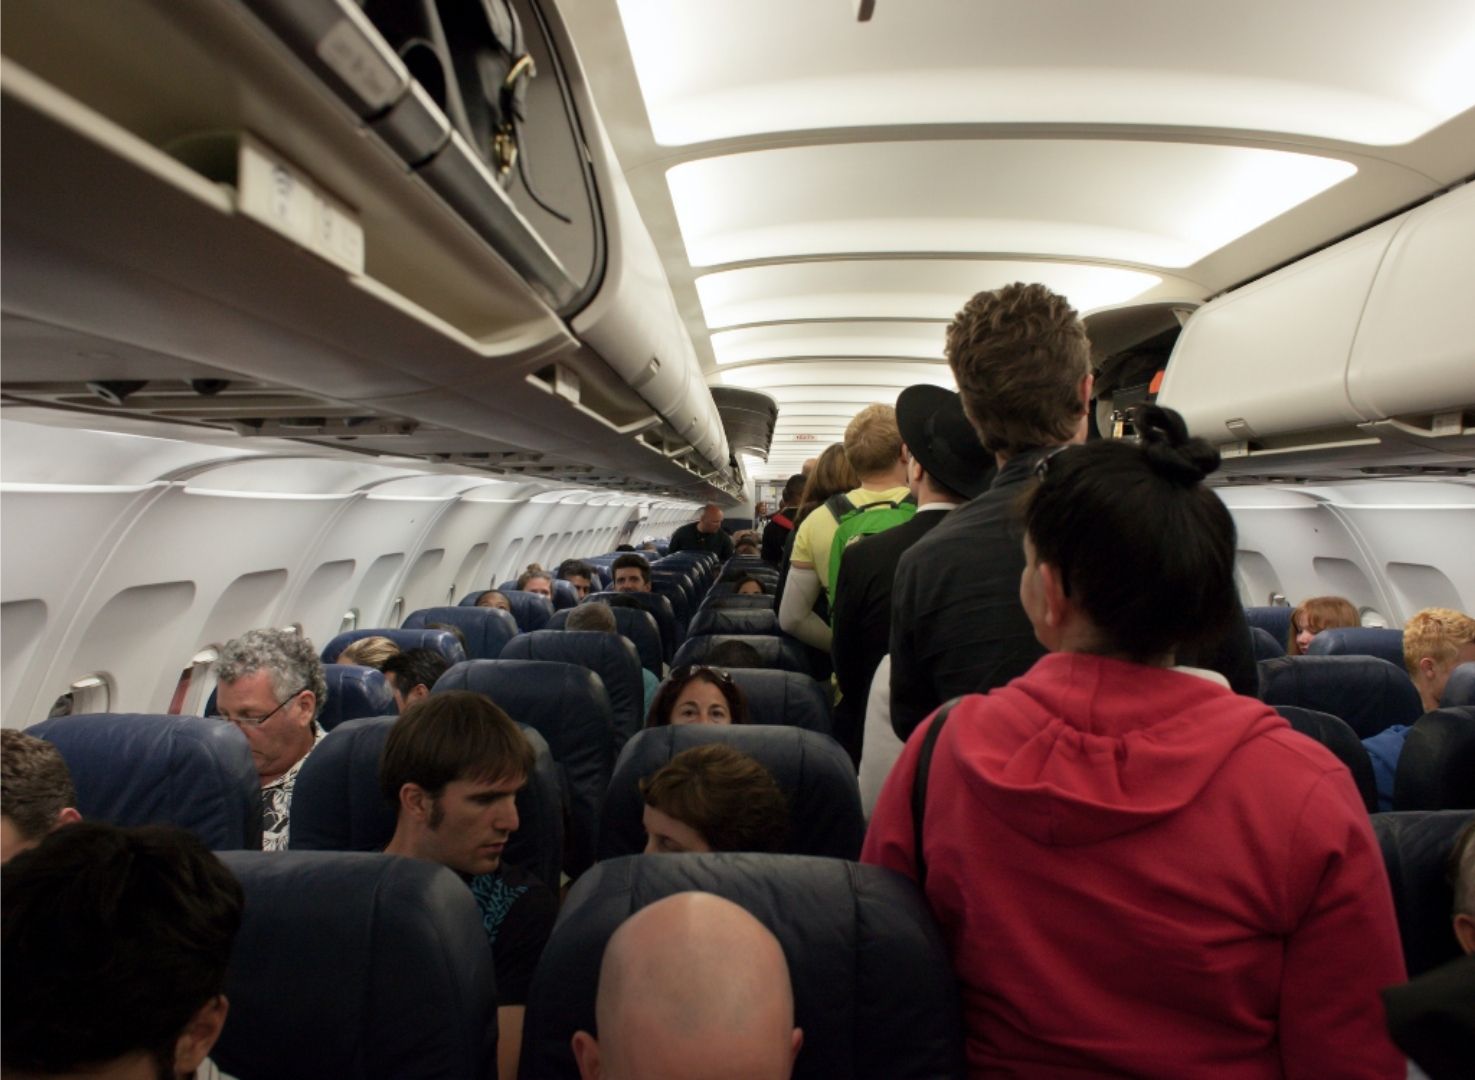 People going to their seats in an airplane preparing for departure